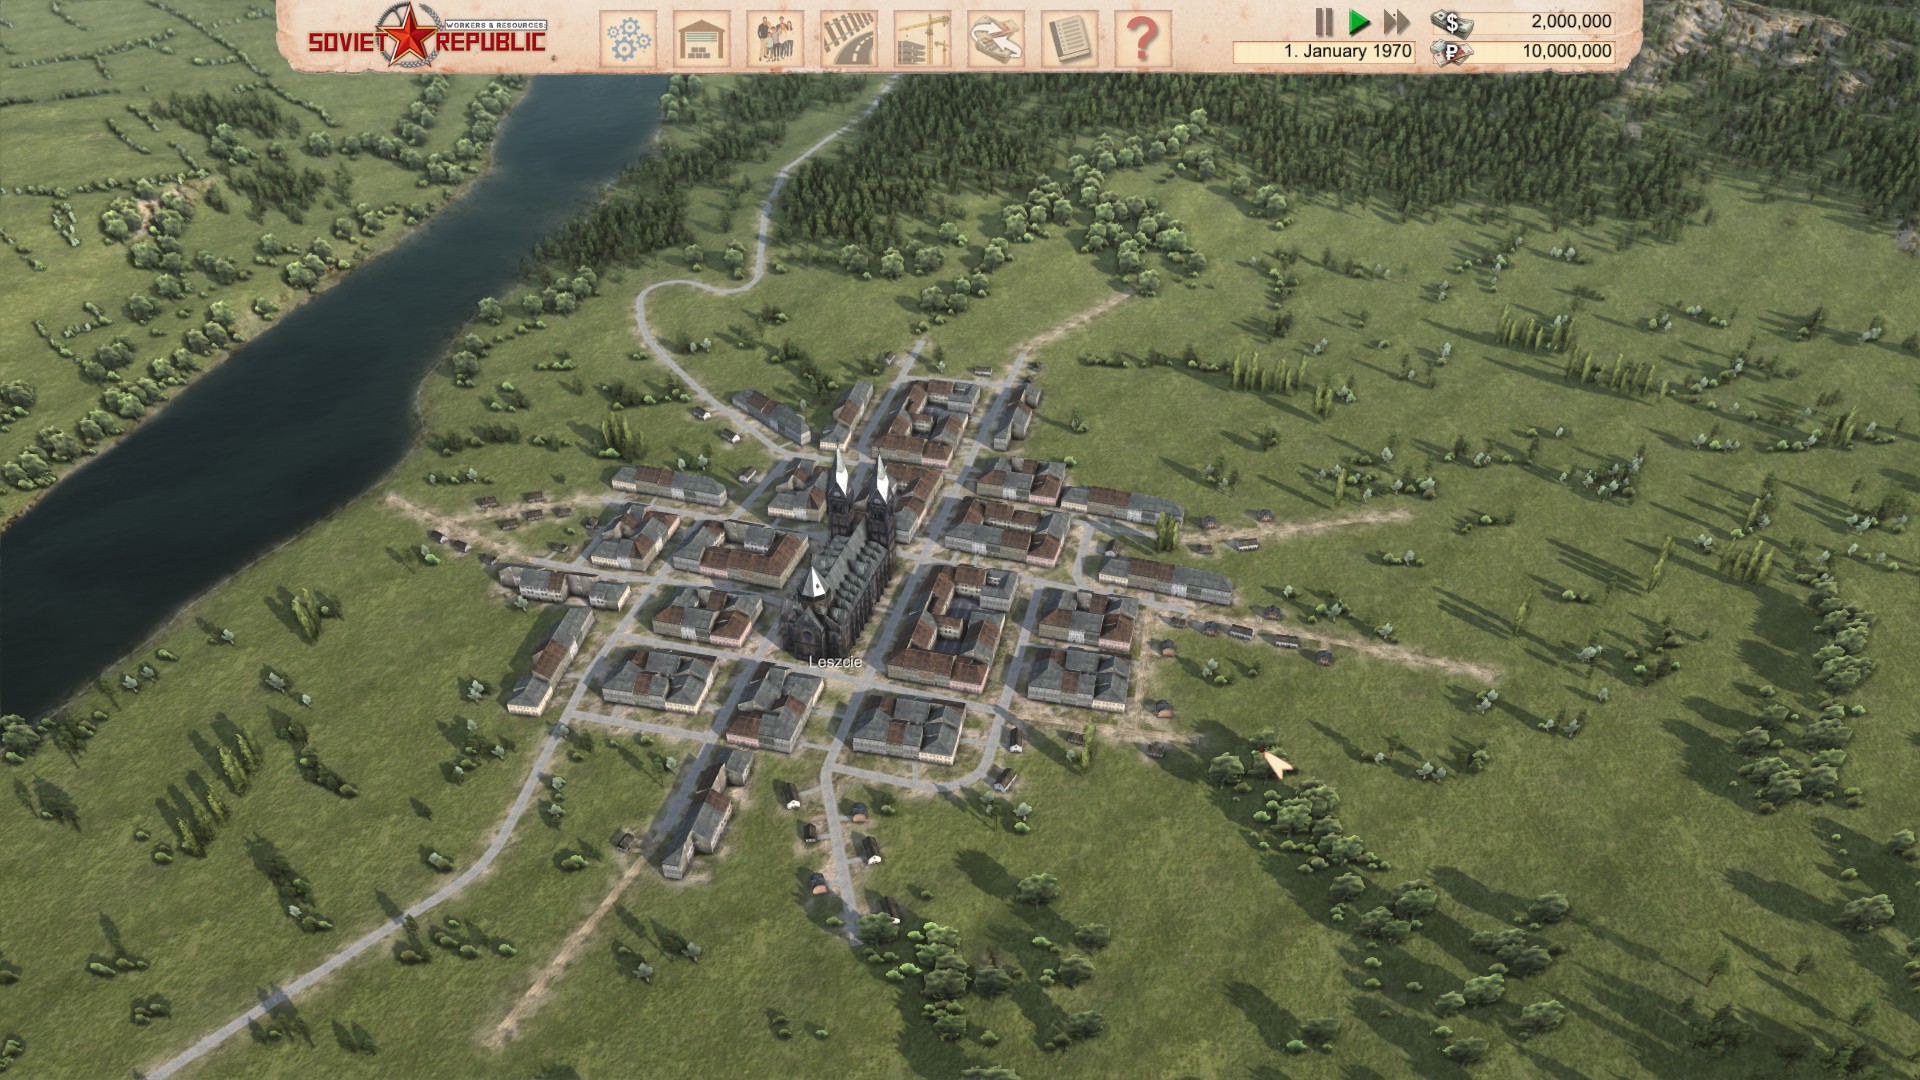 Screenshot for the game Workers & Resources: Soviet Republic